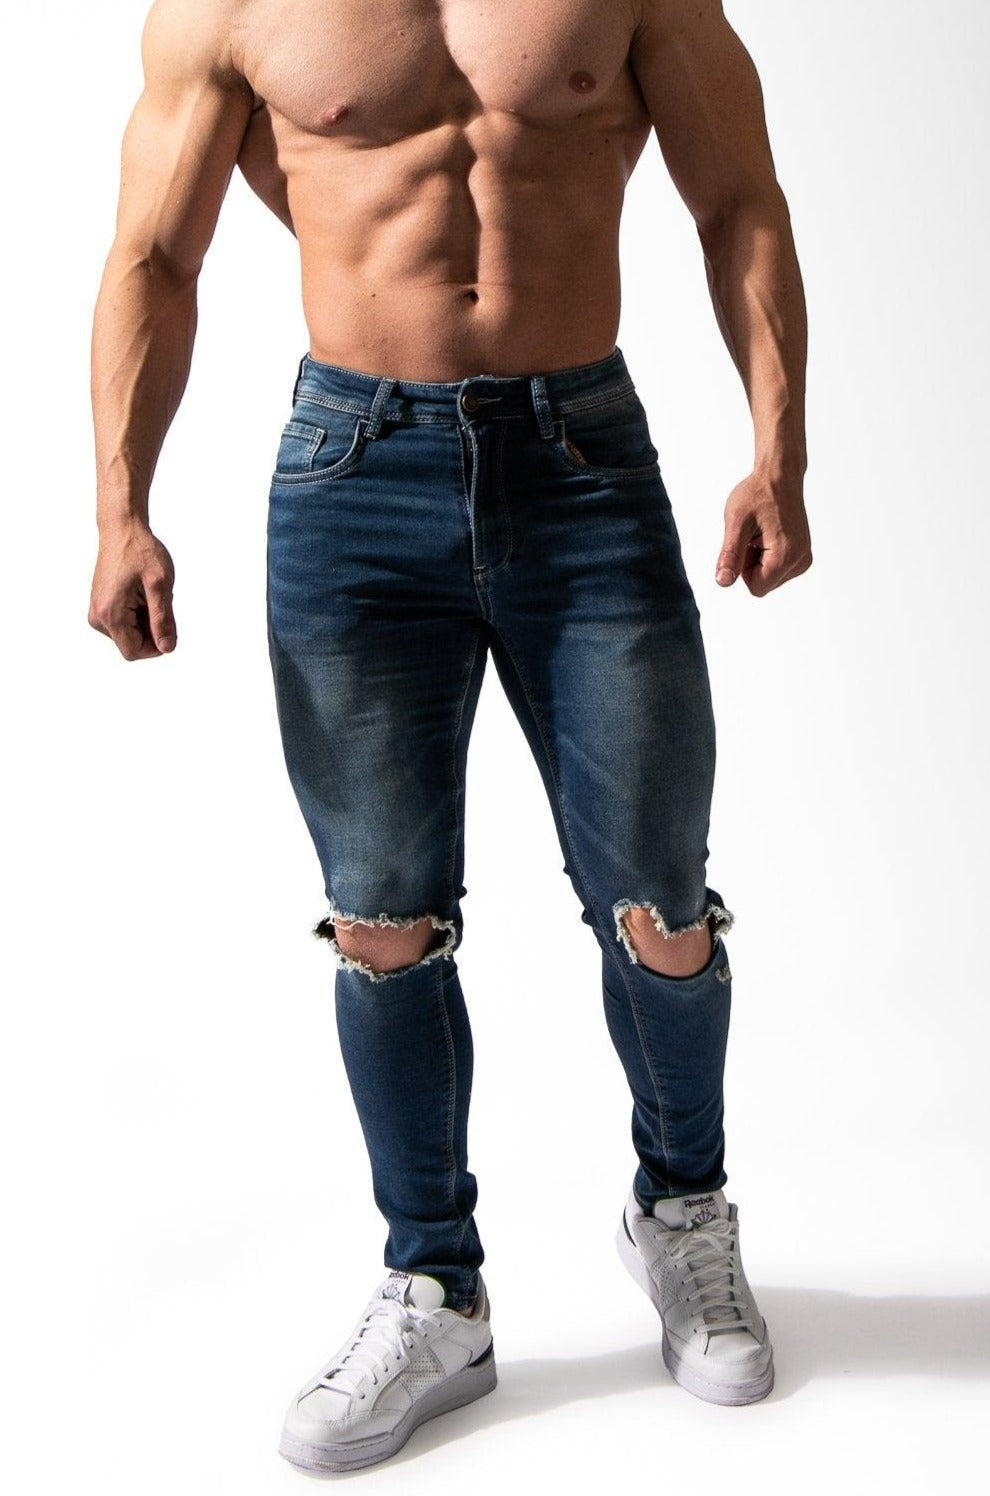 Denim Jeans for Men Bodybuilding Fitness & Casual Wear | Jed North